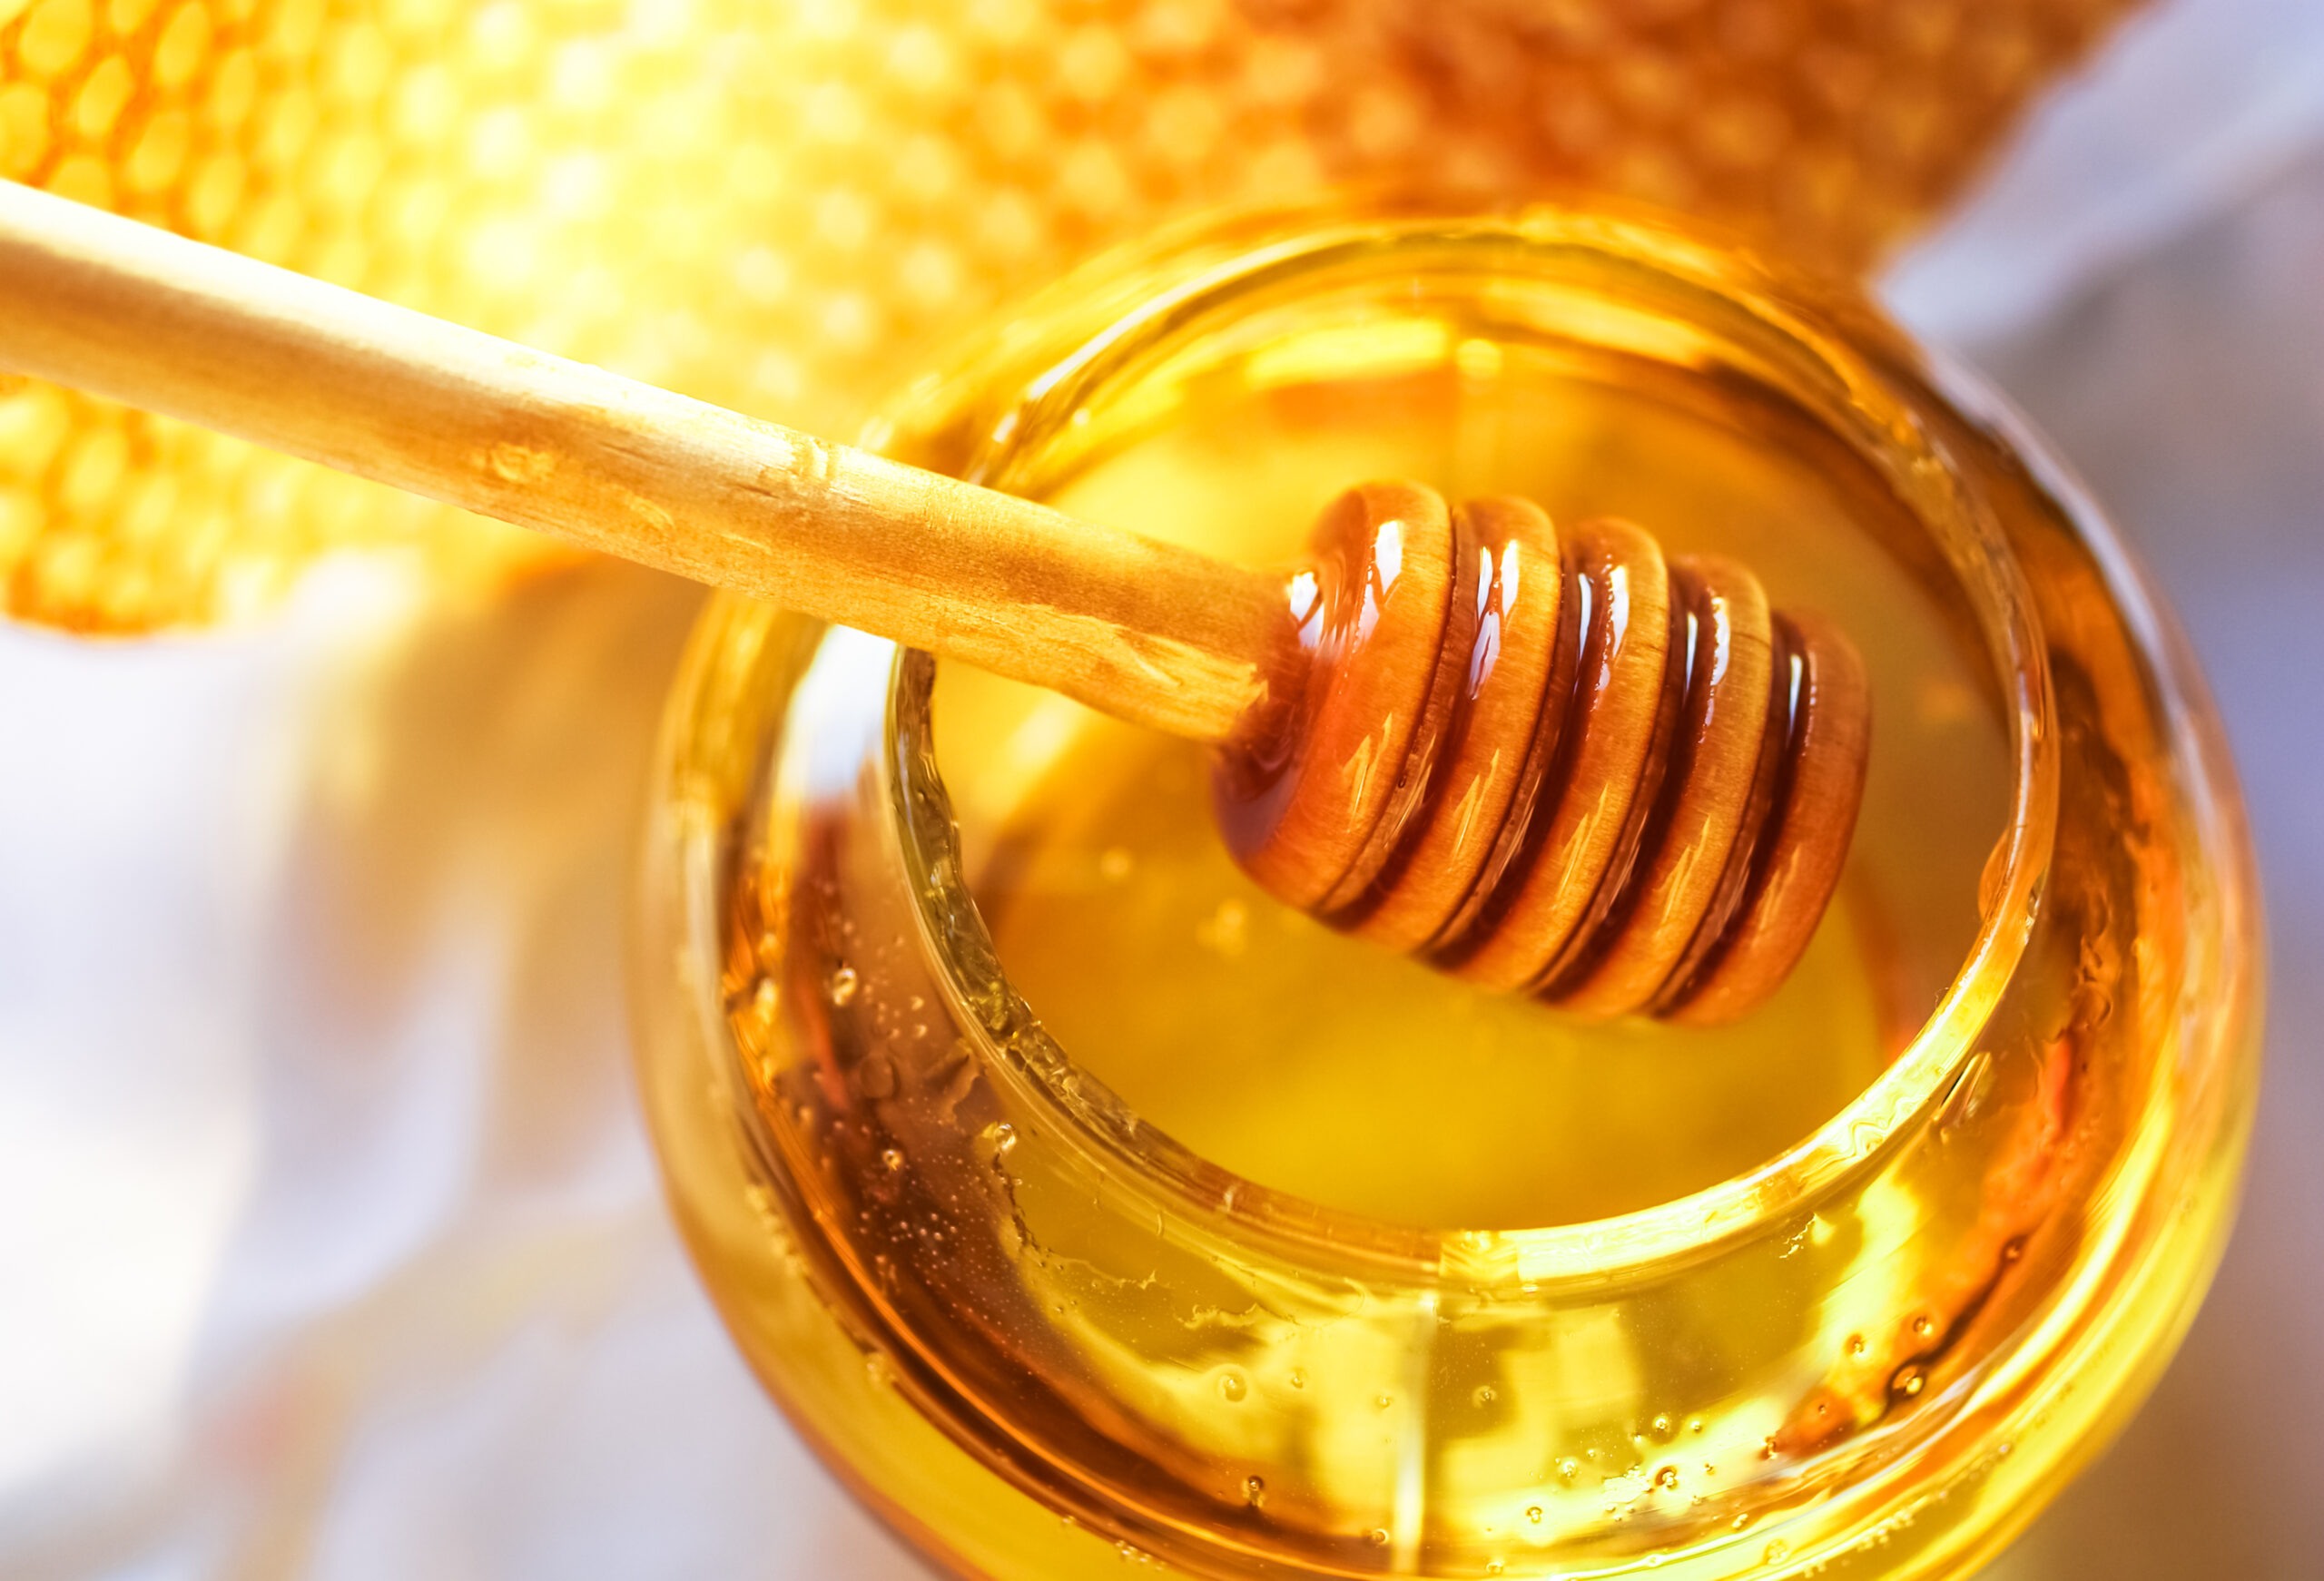 Turns Out, Honey May Be Better At Treating Coughs And Colds Than Over-The-Counter Medications